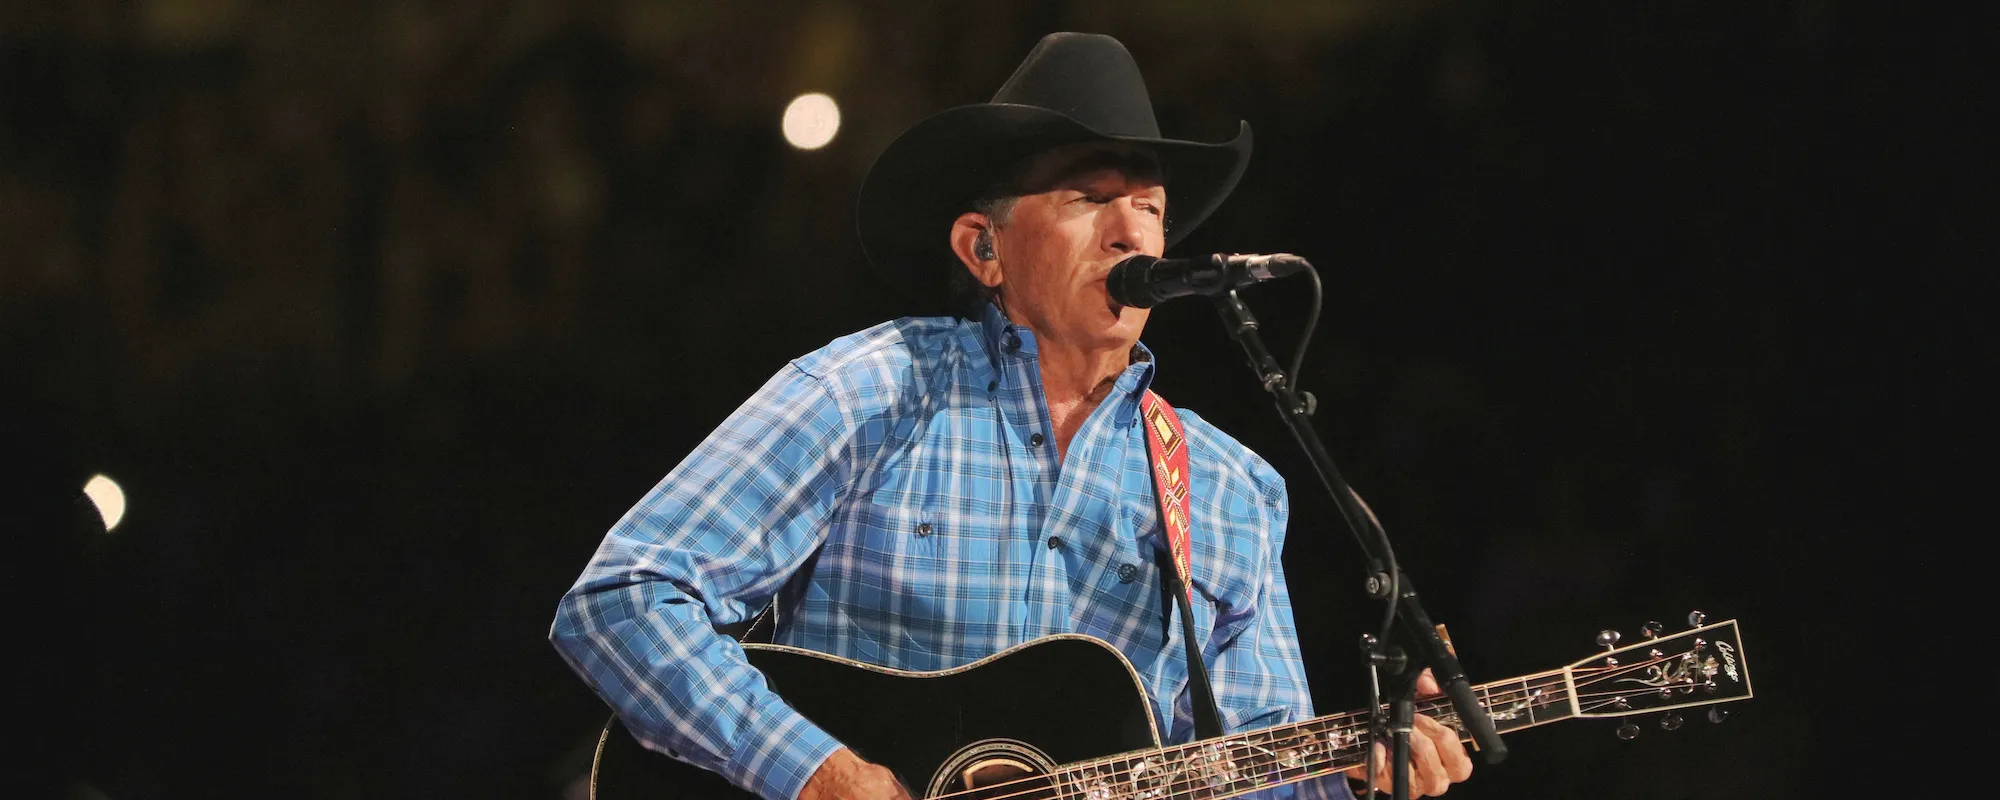 Record Producer Tony Brown Teases New Music by George Strait on Social Media